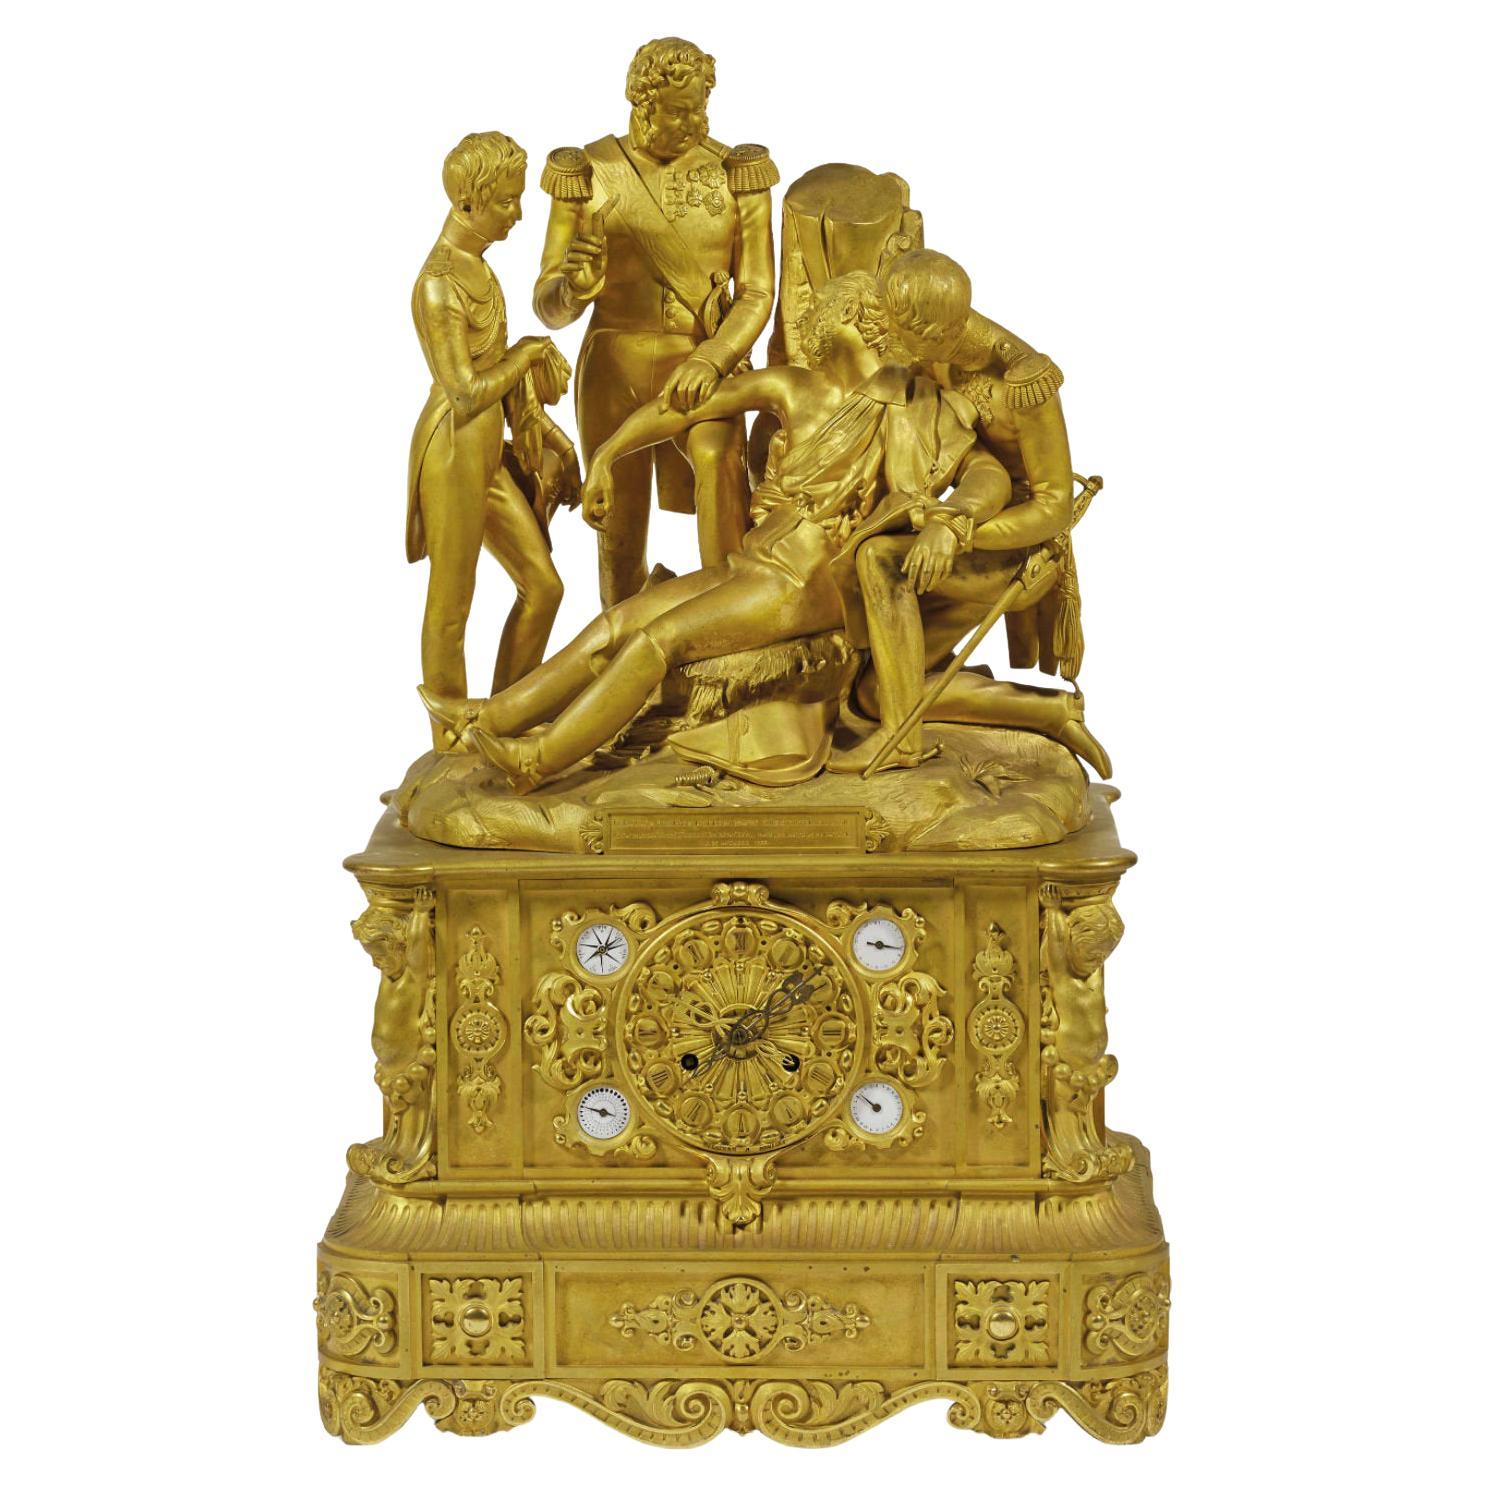 Our French ormolu bronze mantel clock, circa 1838, is entitled 